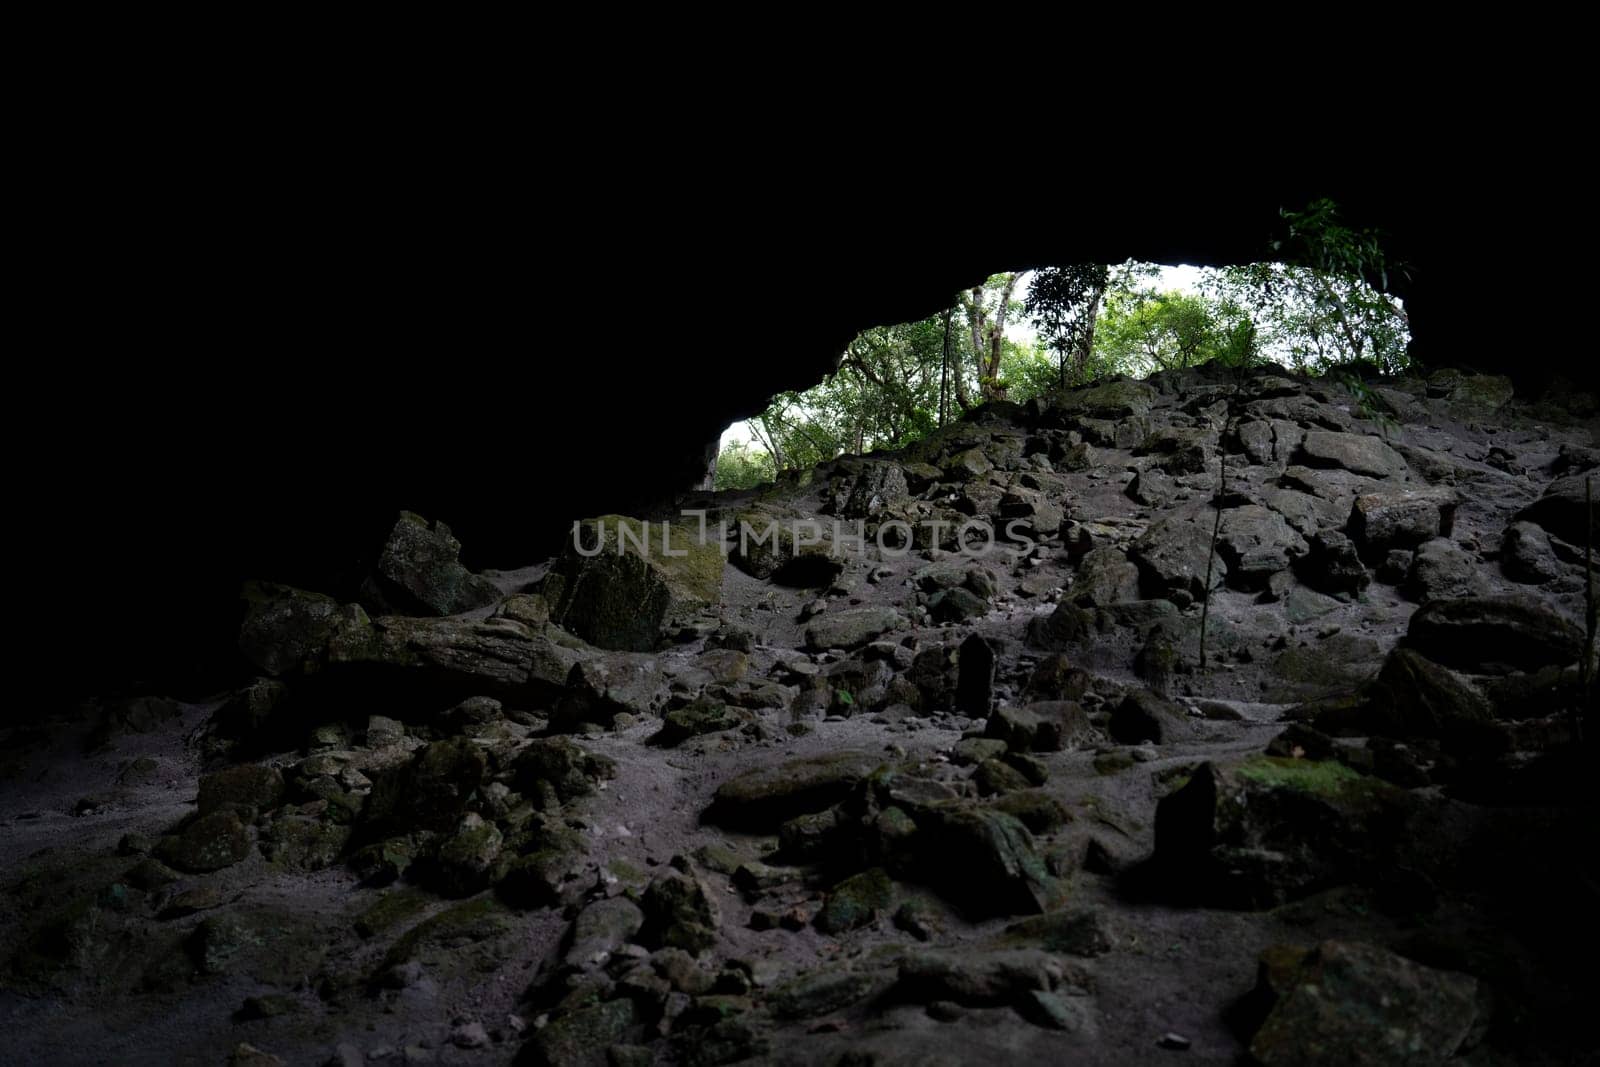 Tranquil cave mouth with daylight piercing the foliage and illuminating the stones.